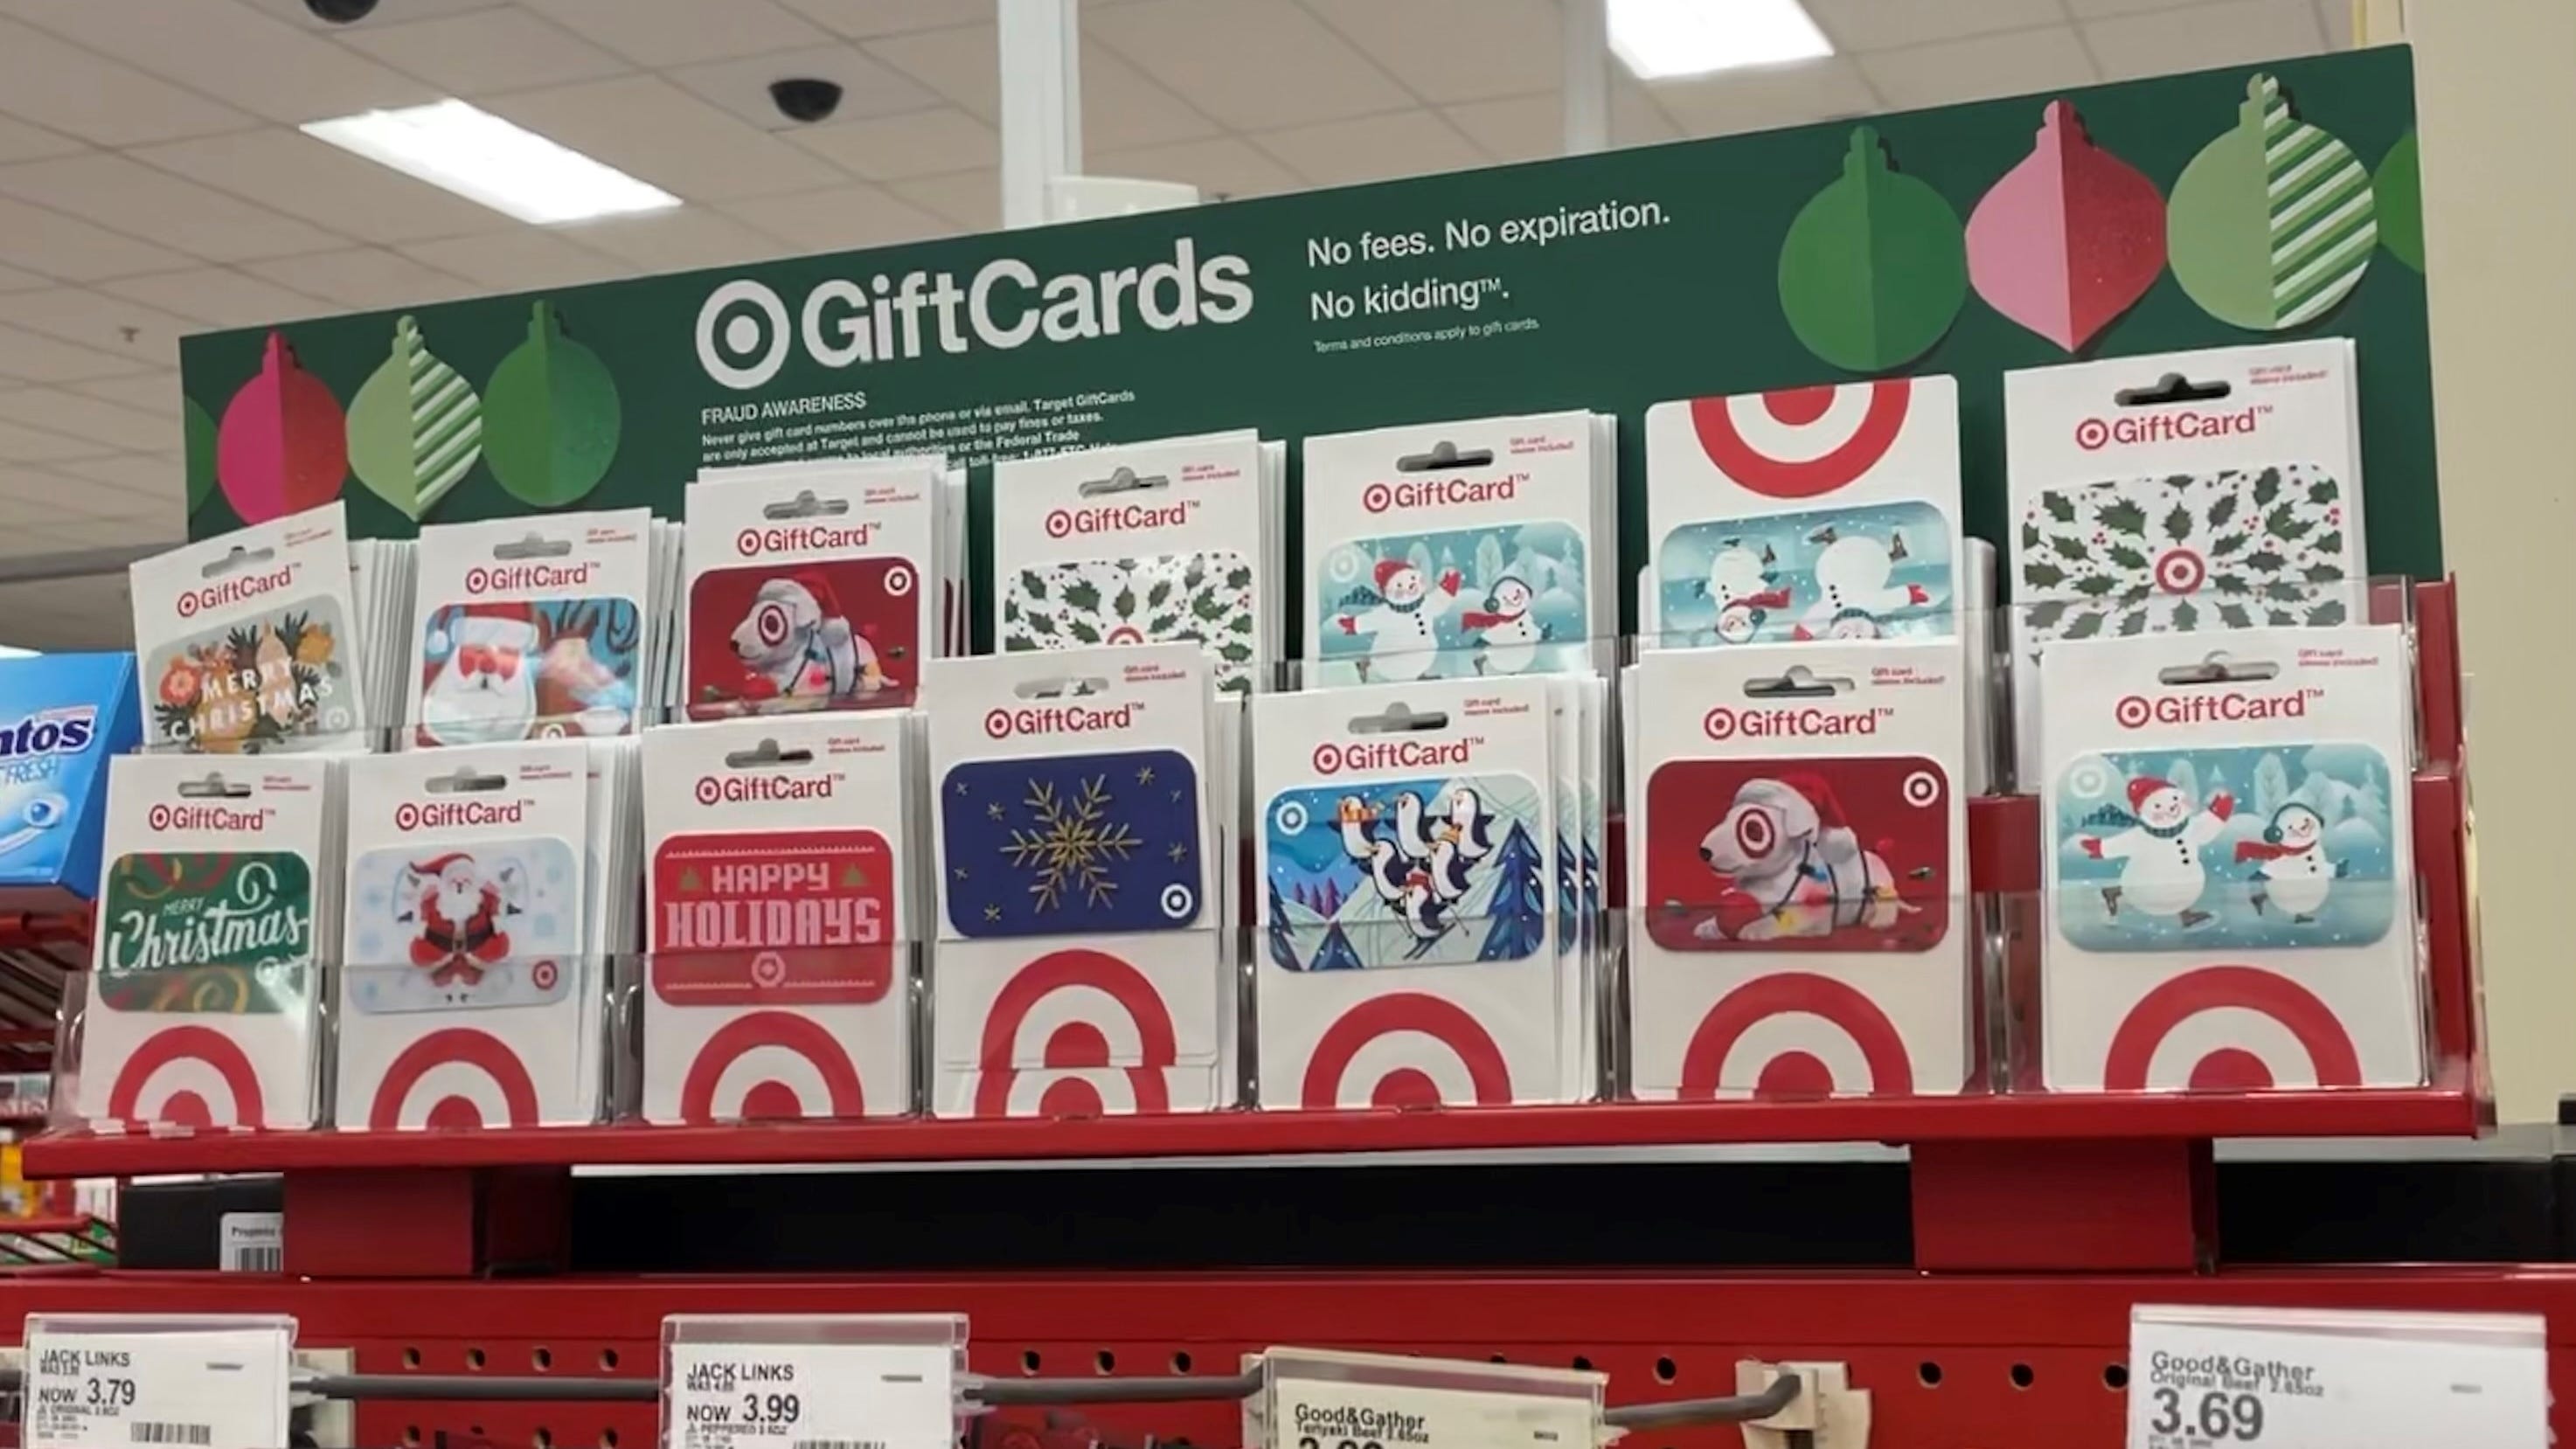 Target Gift Card Discount 2020 Save 10 Percent On Gift Cards Dec 5 6 - 5 dollar roblox gift card target